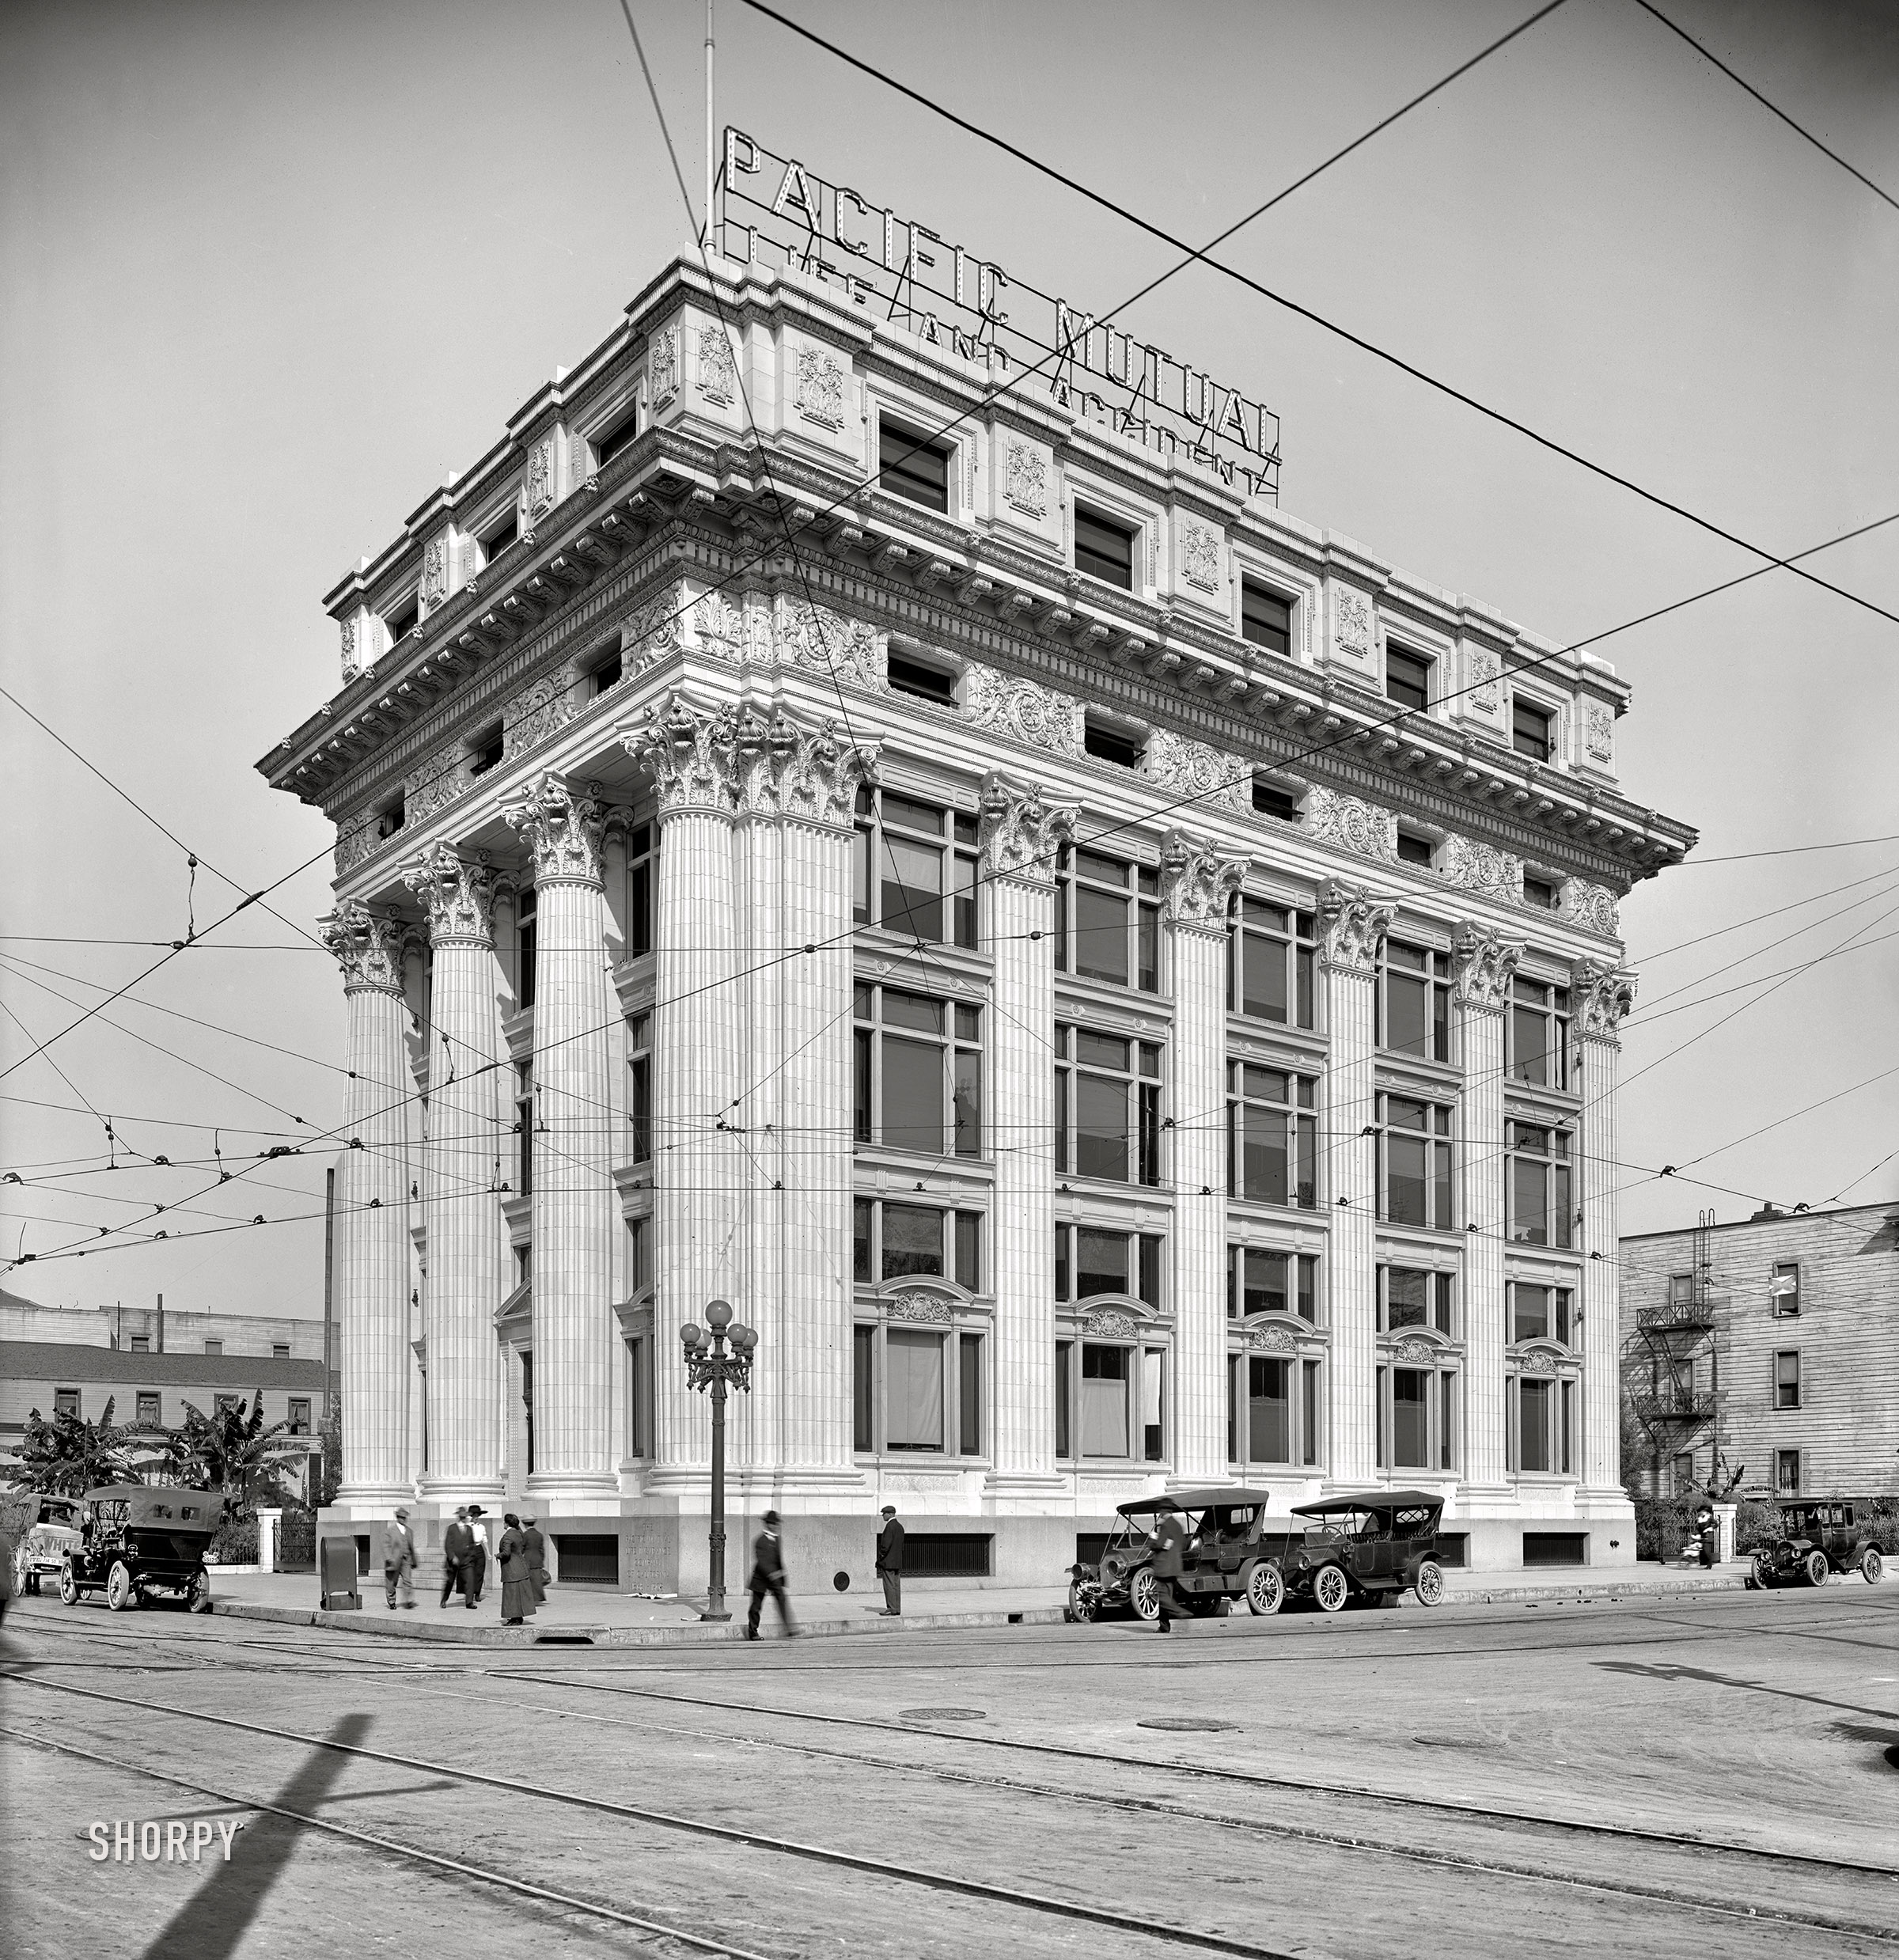 Los Angeles circa 1909. "Pacific Mutual Life & Accident Co. building, Sixth and Olive streets." 8x10 inch dry plate glass negative, Detroit Publishing Company. View full size.